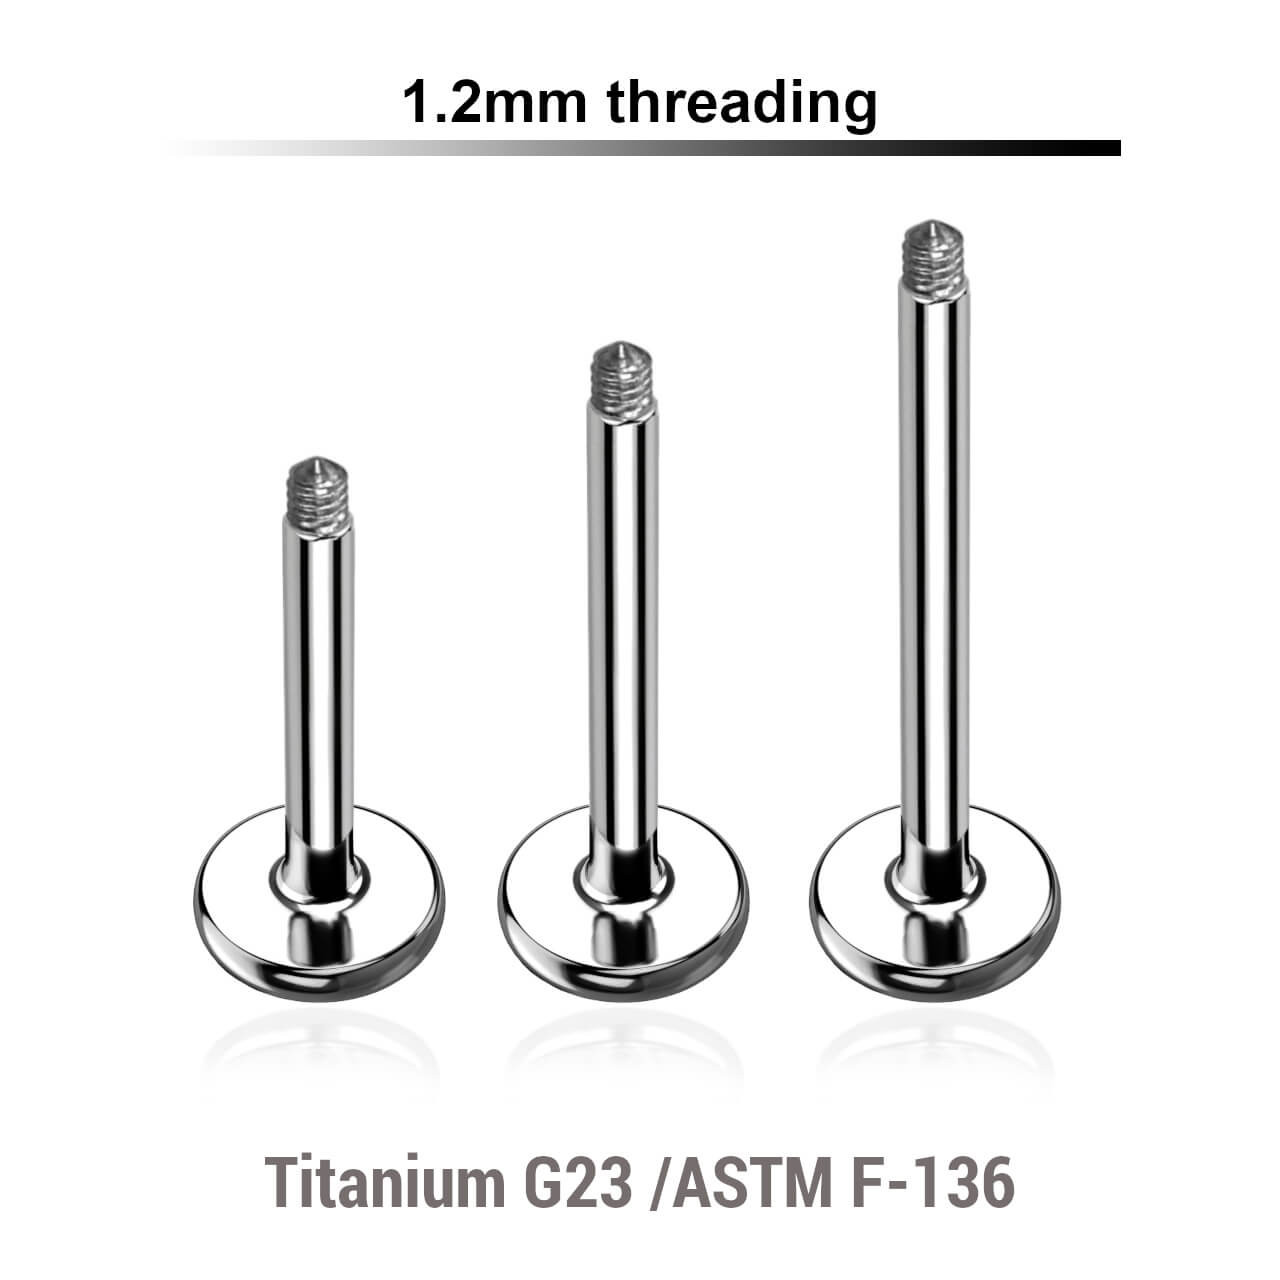 TYLB12N Piercing studio supplies: Pack of 25 pcs. of labret posts in high polished titanium G23, thickness 1.2mm